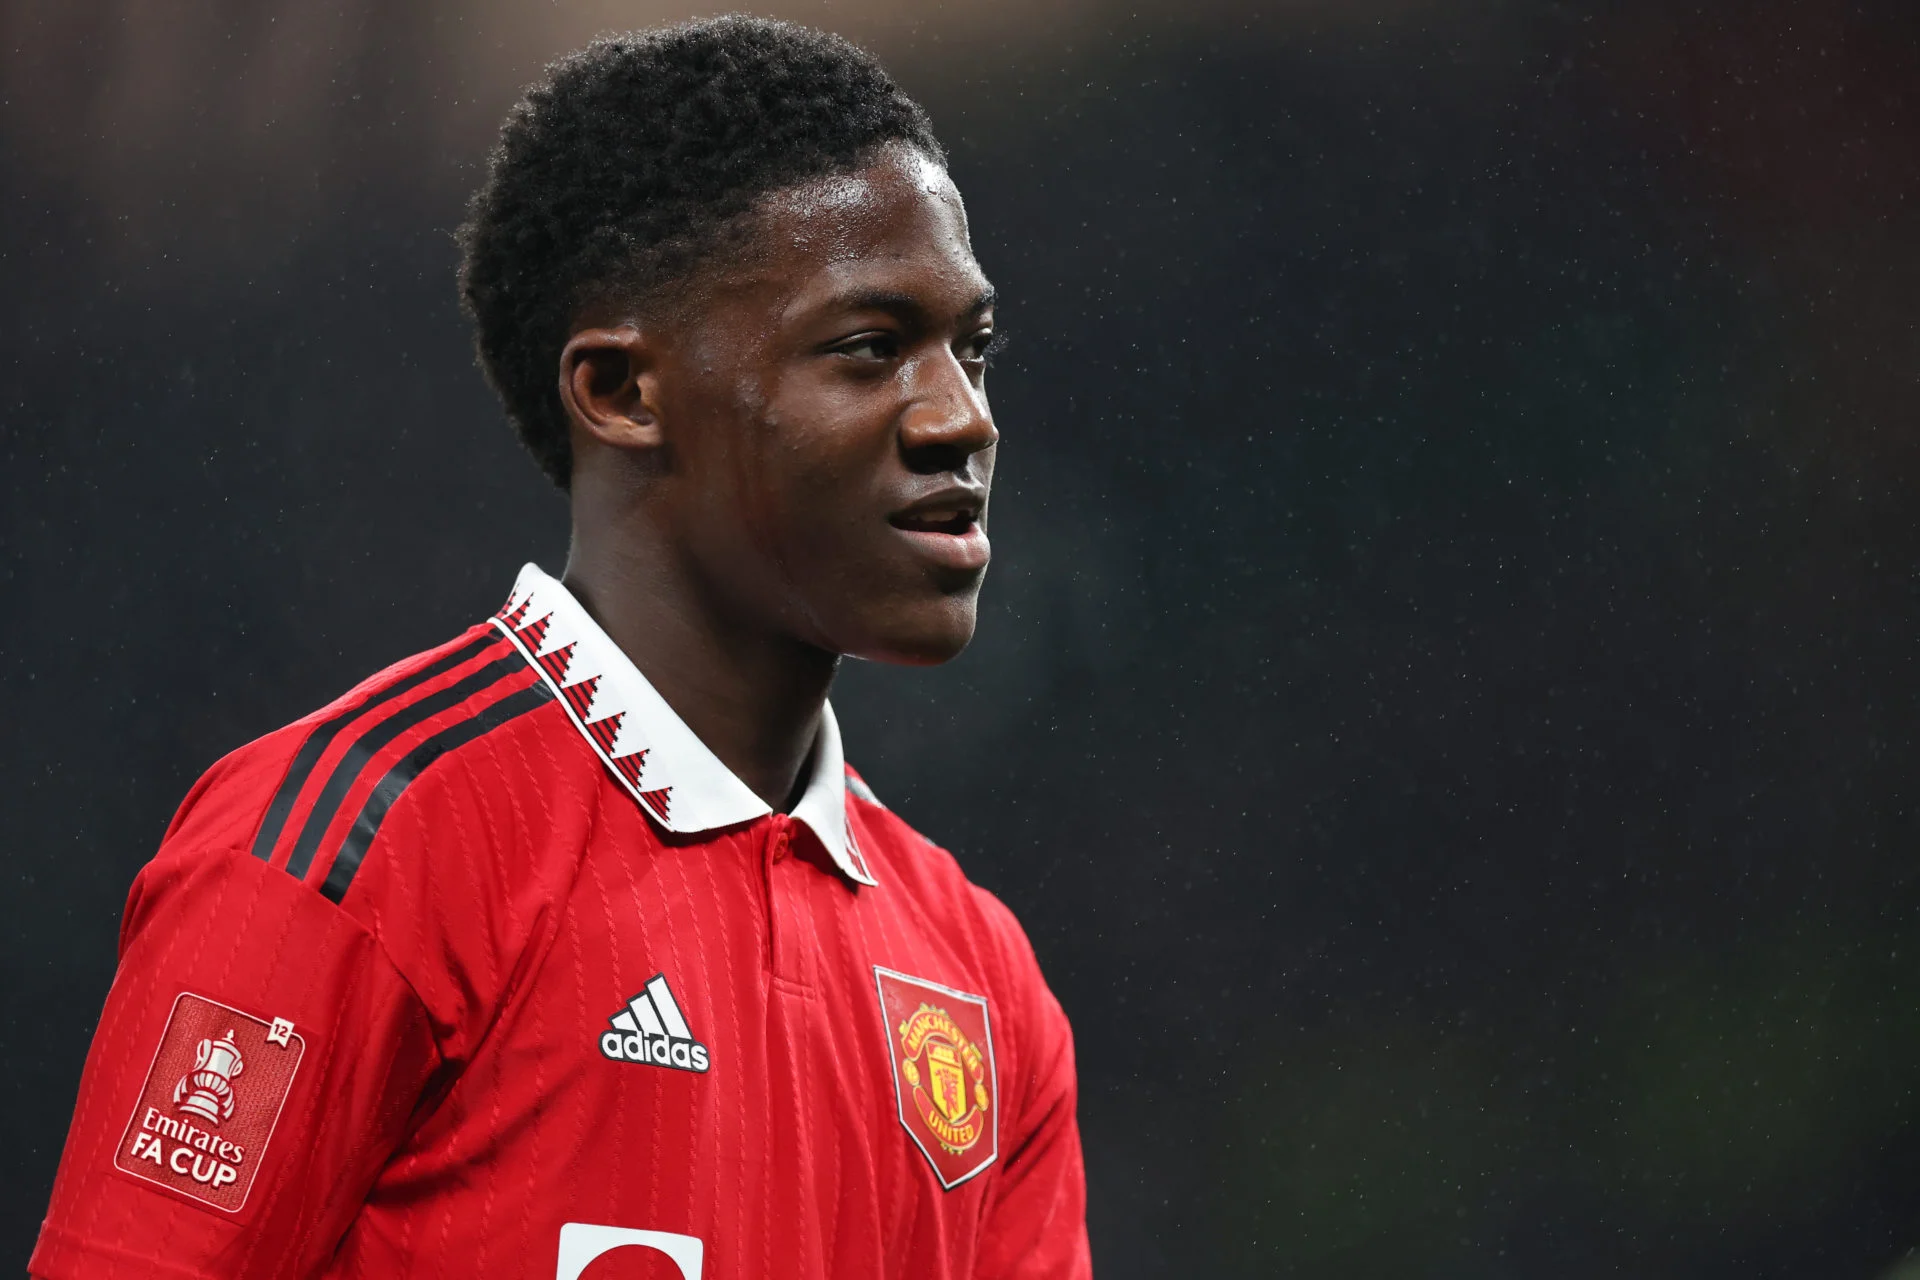 Ghanaian youngster Kobbie Mainoo worked hard for his Premier League debut - Man United academy head